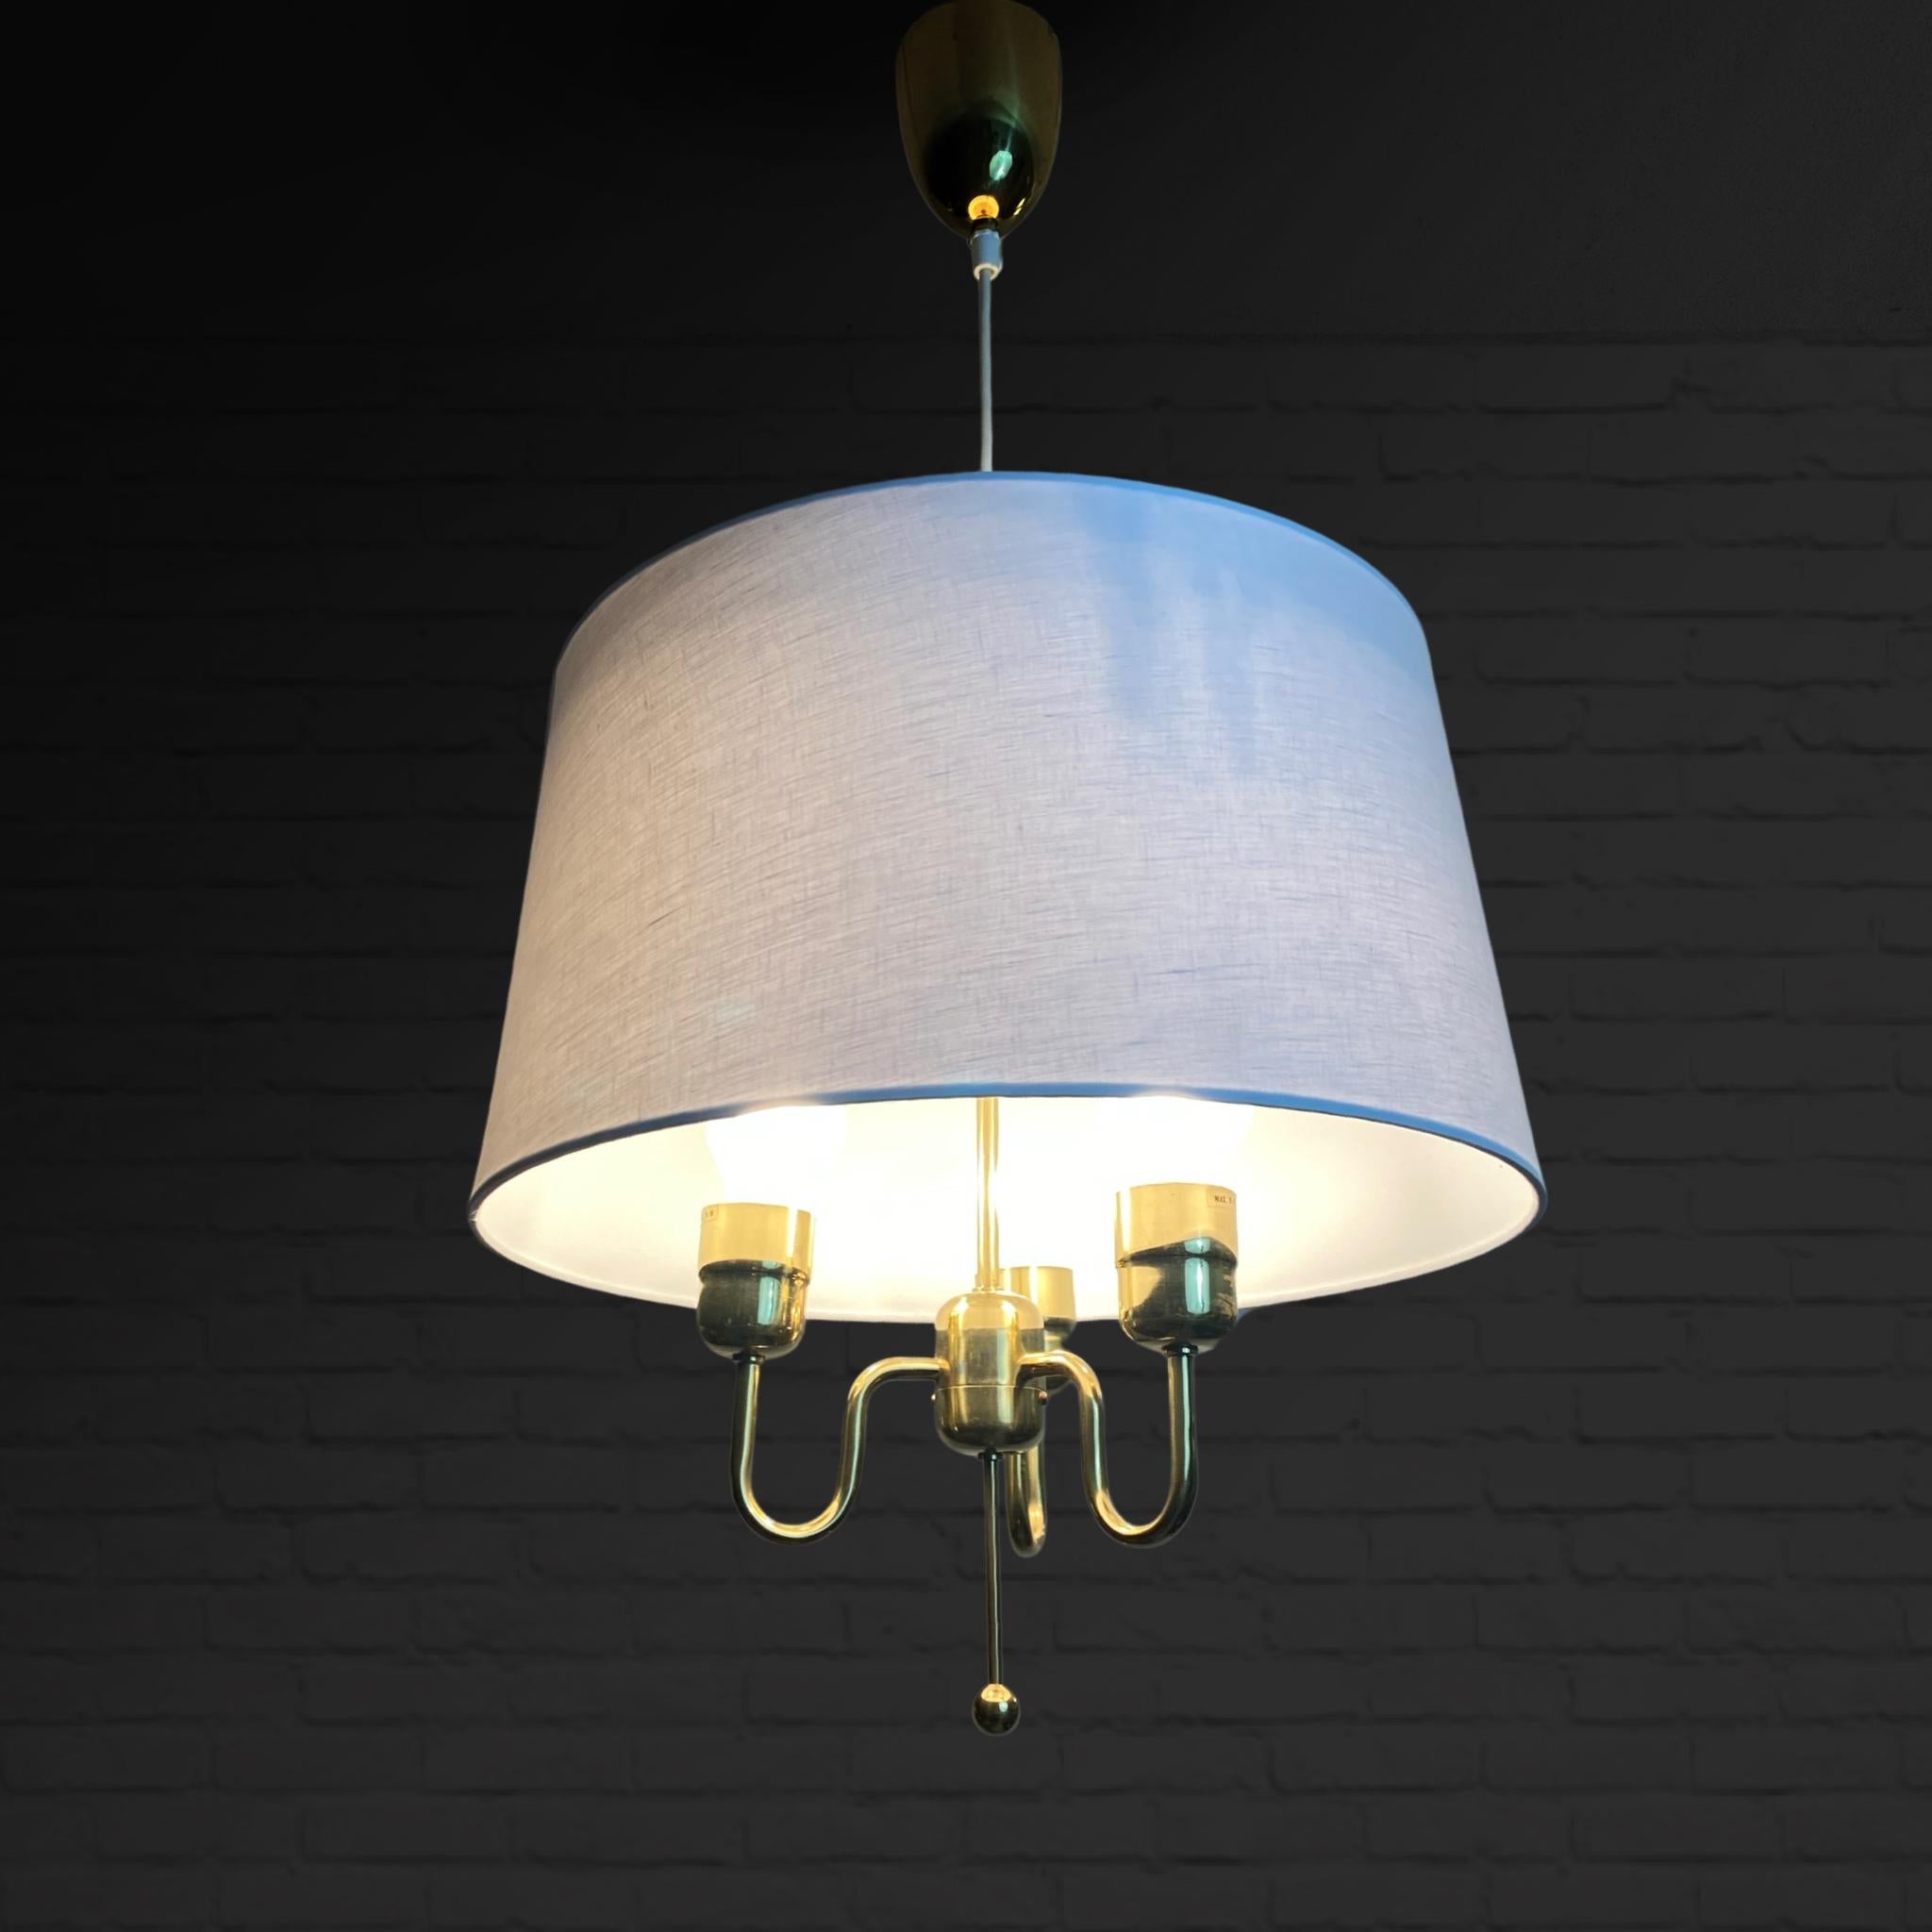 Elegant pendant lamp model T883 by Hans-Agne Jakobsson. Crafted from brass, it features three lamp holders and a textile-covered shade, complete with the original bullet-shaped canopy. The lamp shade has been replaced. Swedish industrial designer